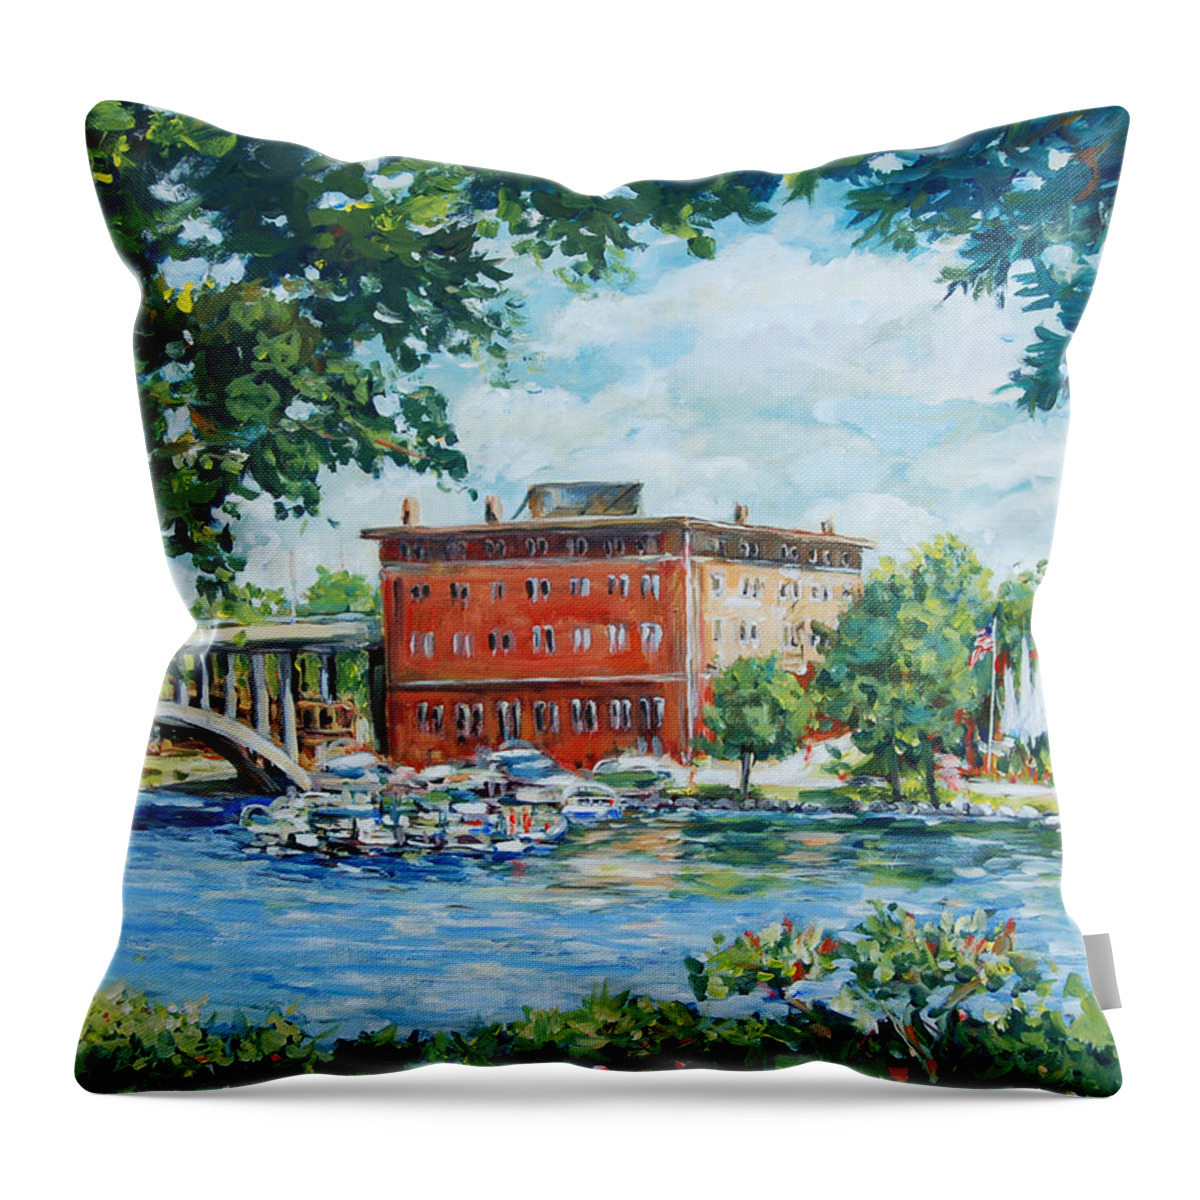 Ingrid Dohm Throw Pillow featuring the painting Rever's Marina by Ingrid Dohm